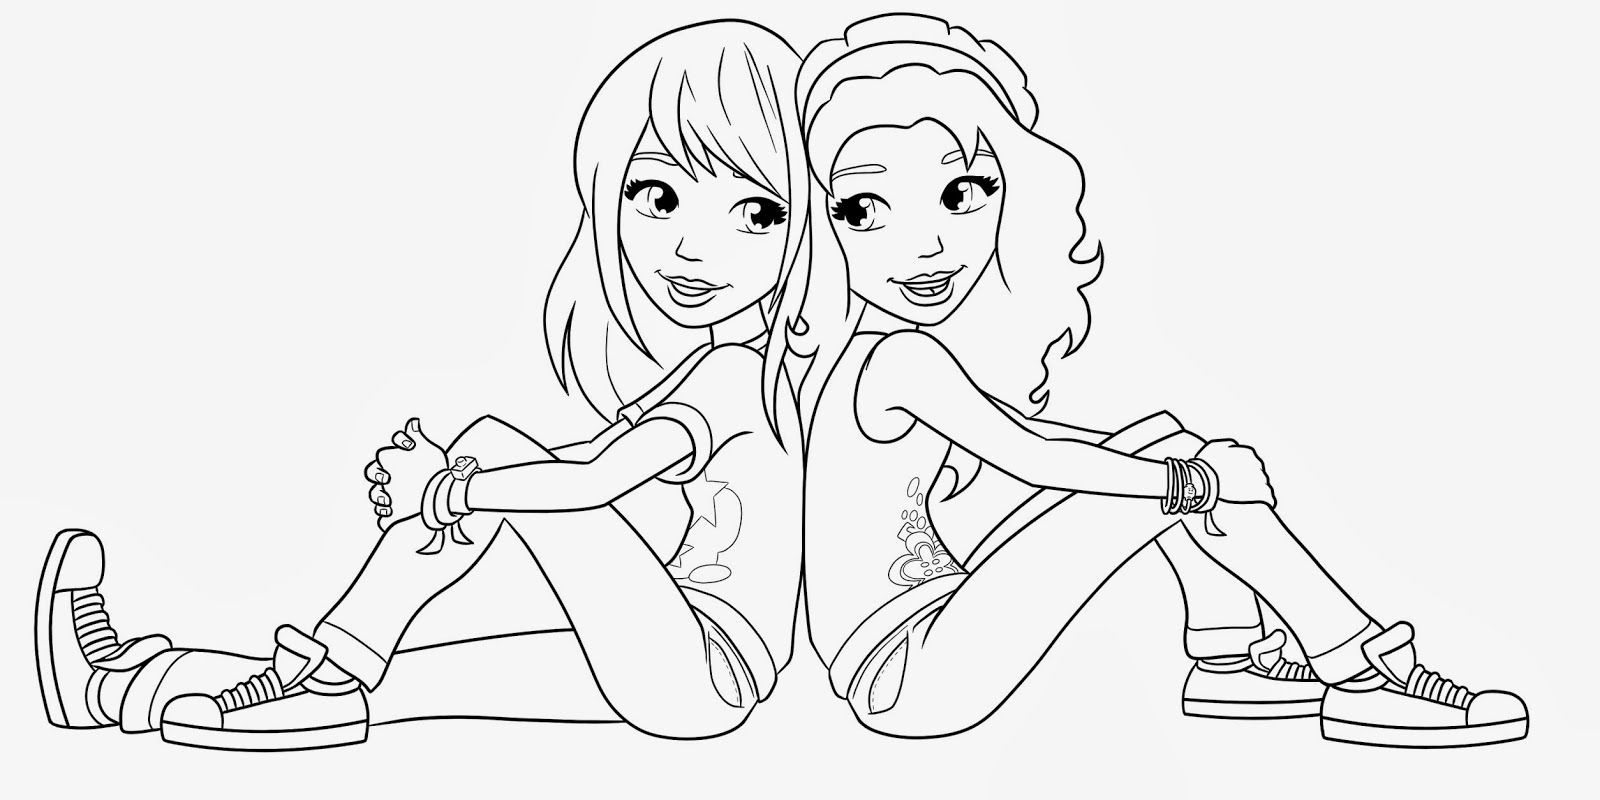 Friendship Coloring Pages For Girls
 Lego Friends Coloring Pages Coloring Home